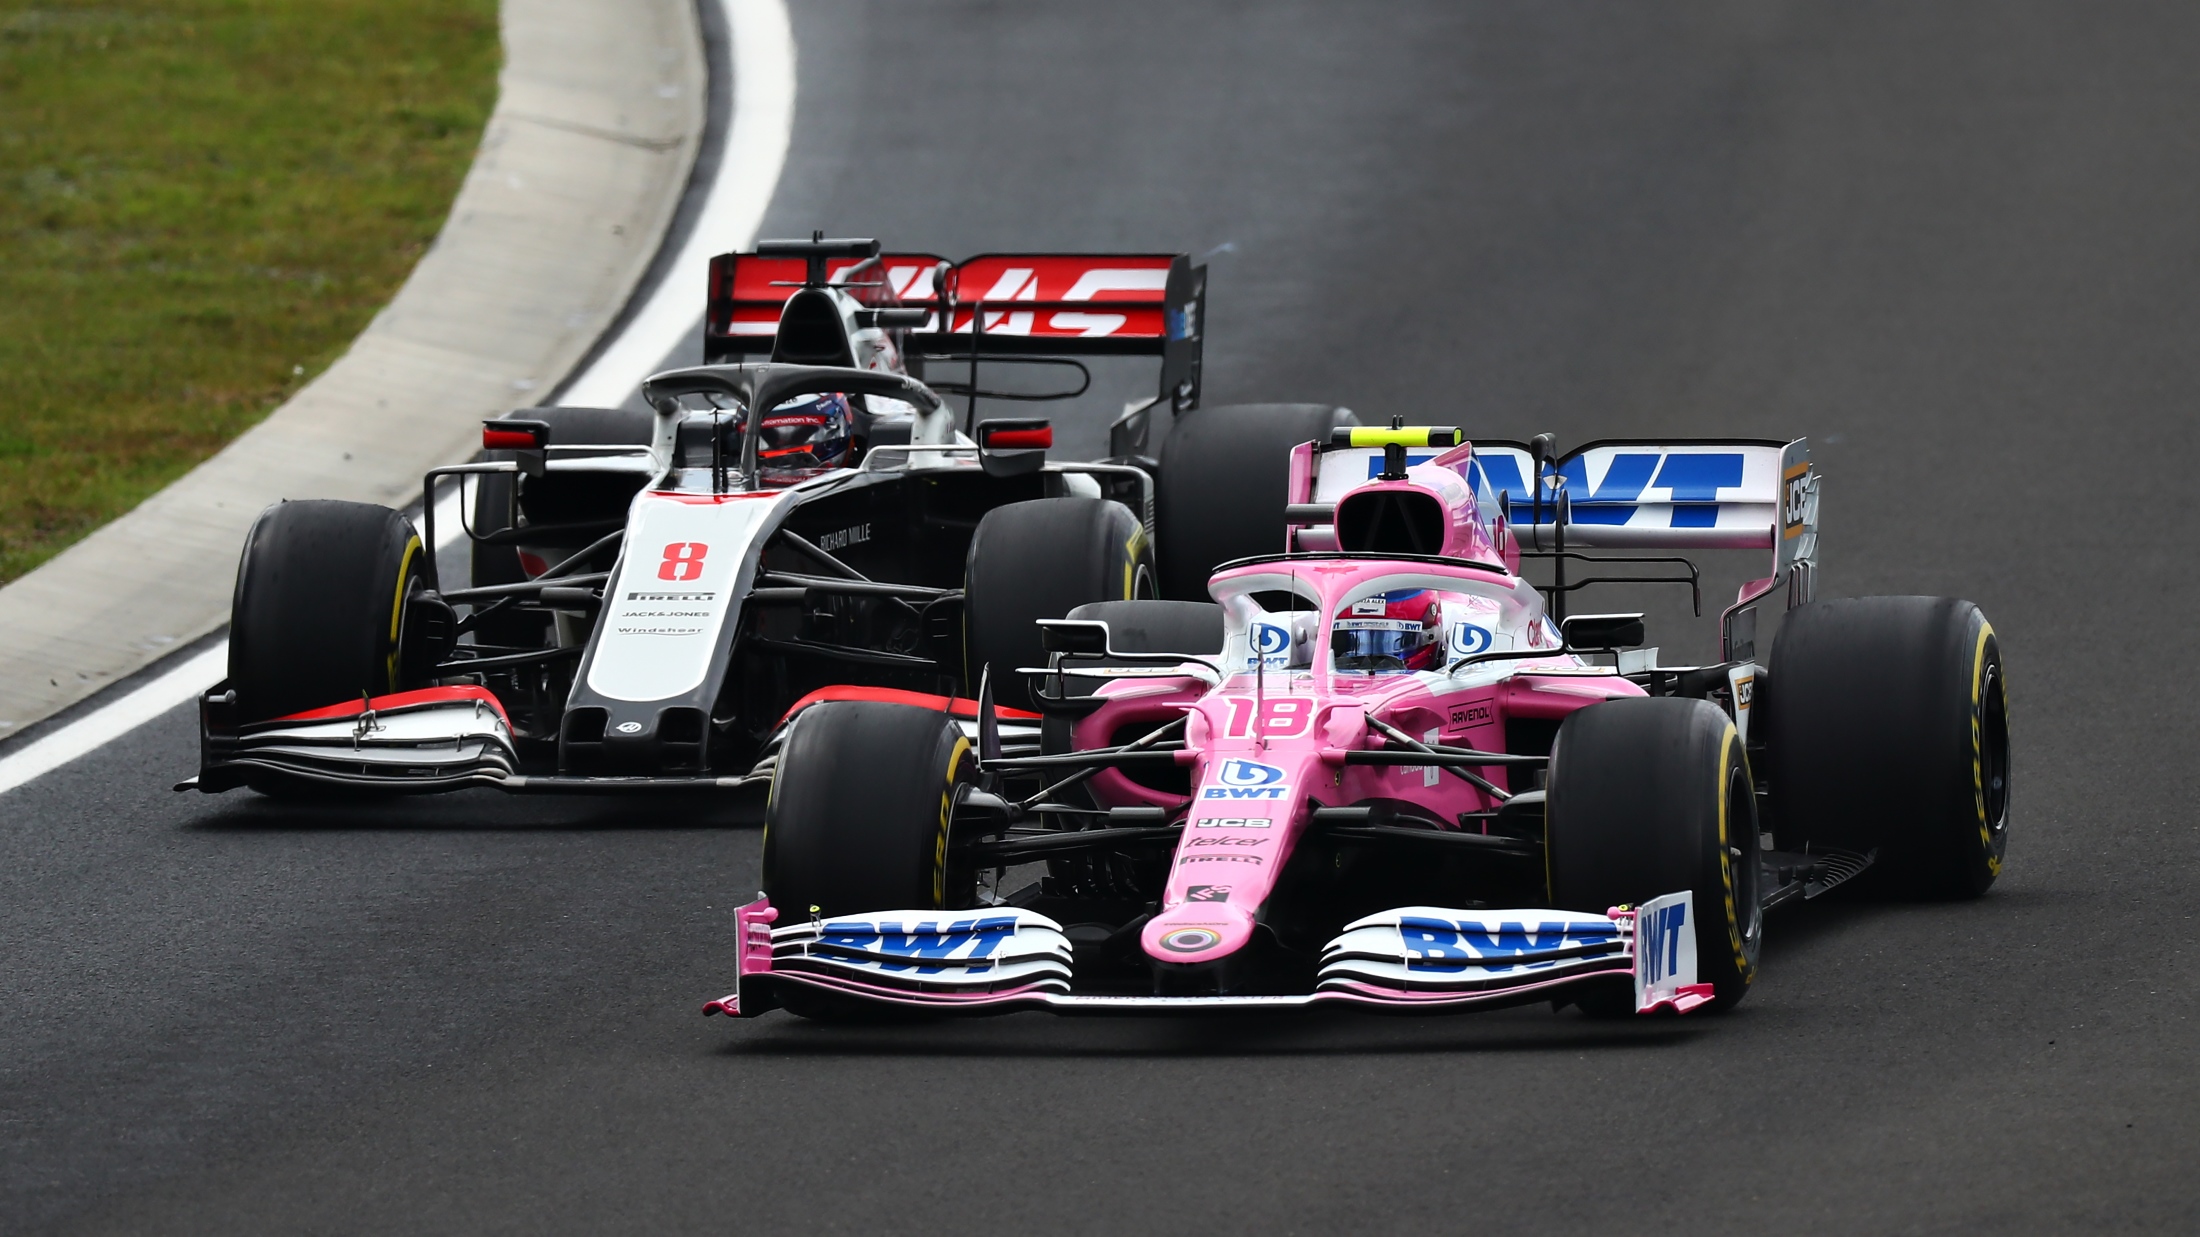 The pink livery may be still present on the F1 grid as BWT seeks to sponsor Haas